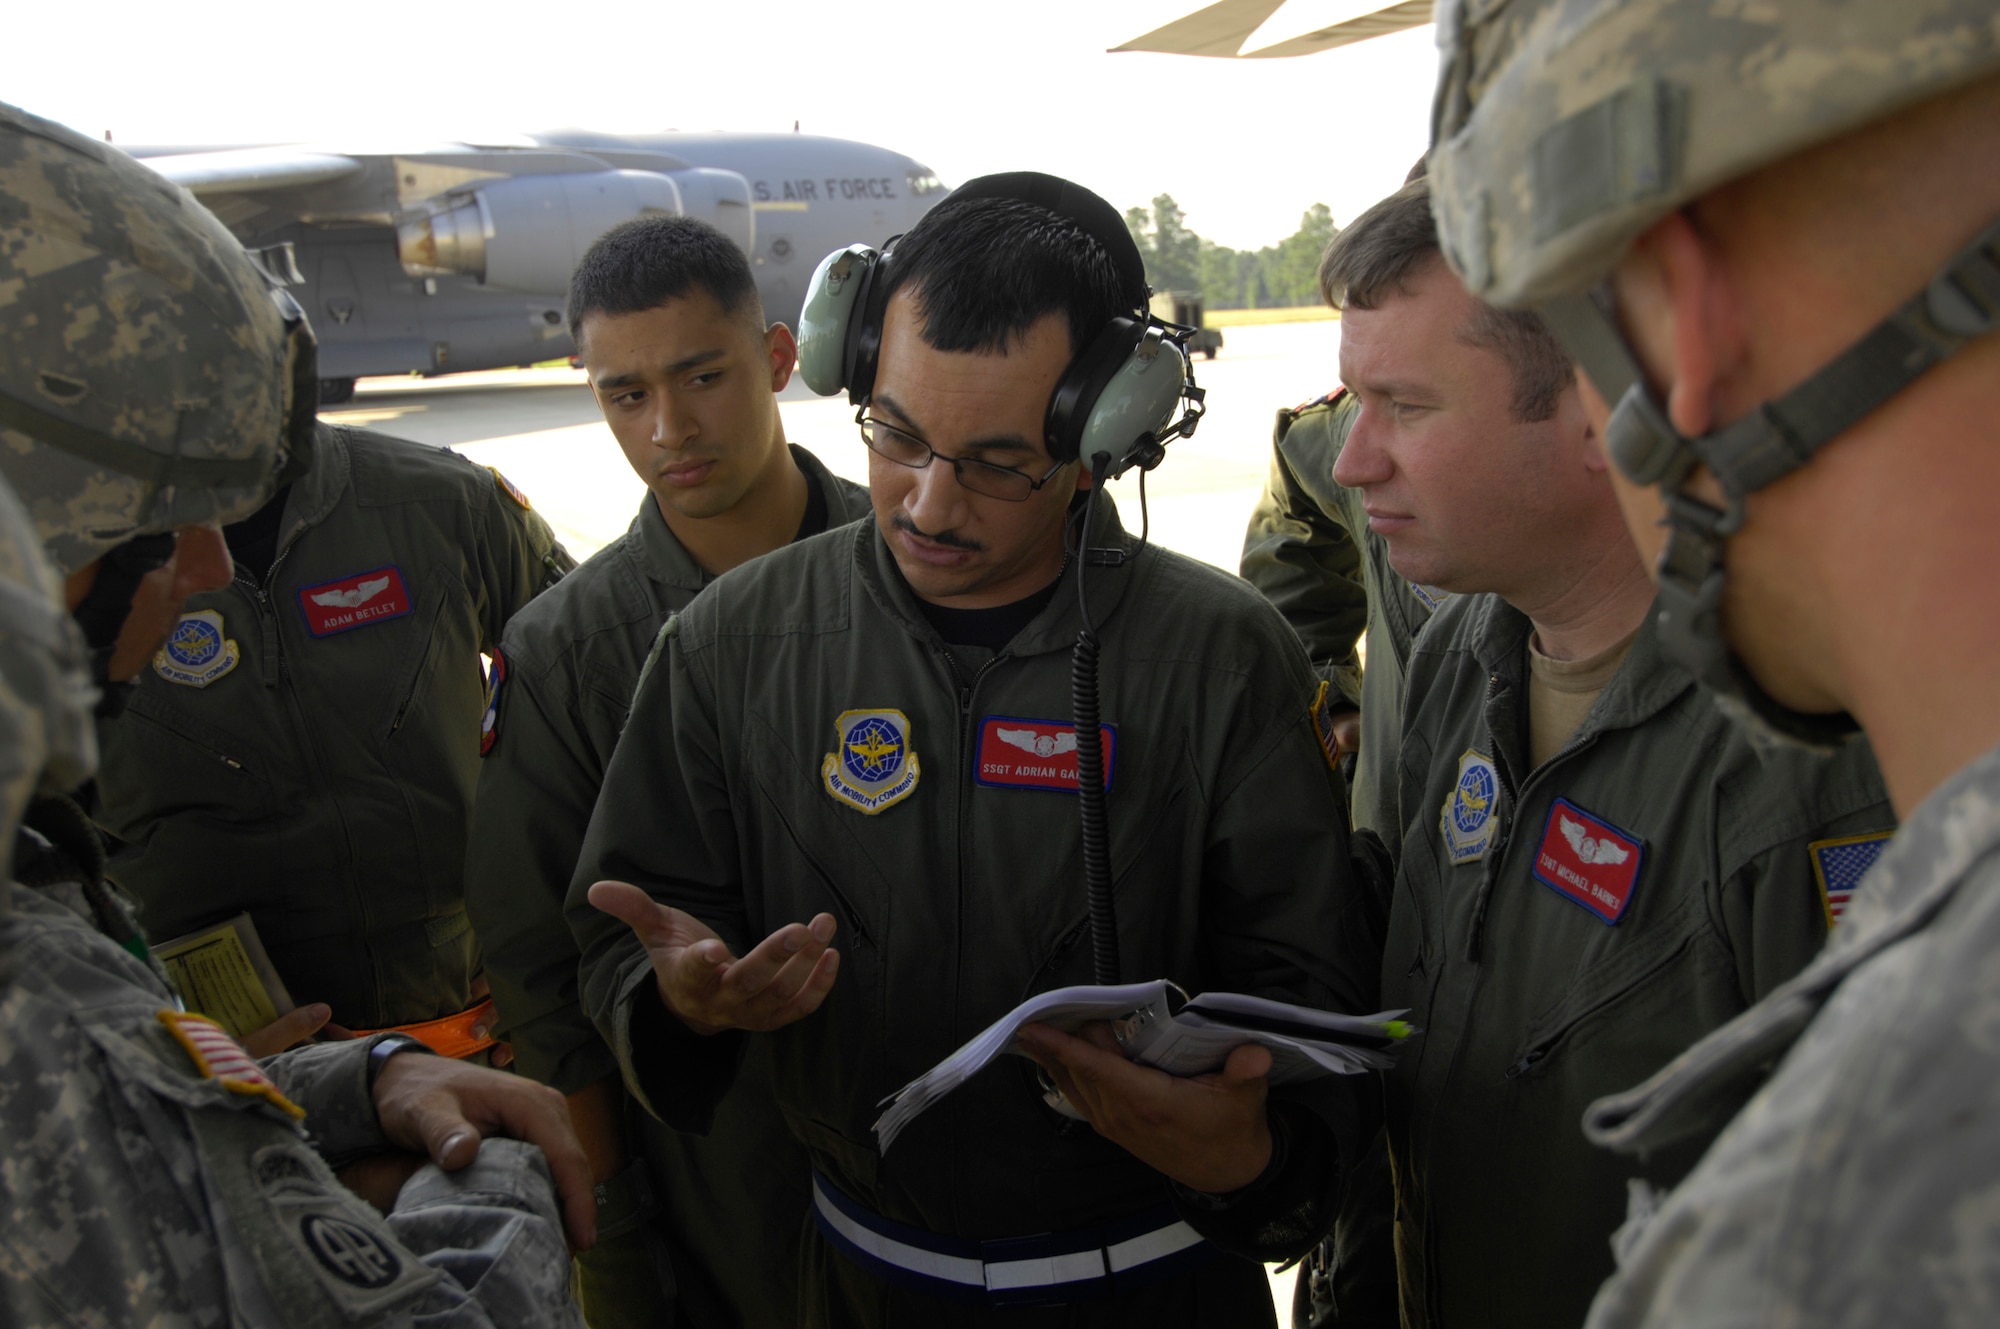 U.S. Air Force Staff Sgt. Adrian Garcia, a C-130 Hercules loadmaster with the 39th Airlift Squadron at Dyess Air Force Base, Texas, explains flight procedures to Army paratroopers before a personnel drop during Joint Forcible Entry Exercise at Pope Air Force Base, N.C., on June 17, 2008. JFEX is a joint airdrop exercise designed to enhance service cohesiveness between U.S. Army and Air Force personnel, allowing both services an opportunity to properly execute large-scale heavy equipment and troop movement. (U.S. Air Force photo by Senior Airman Ali E. Flisek)